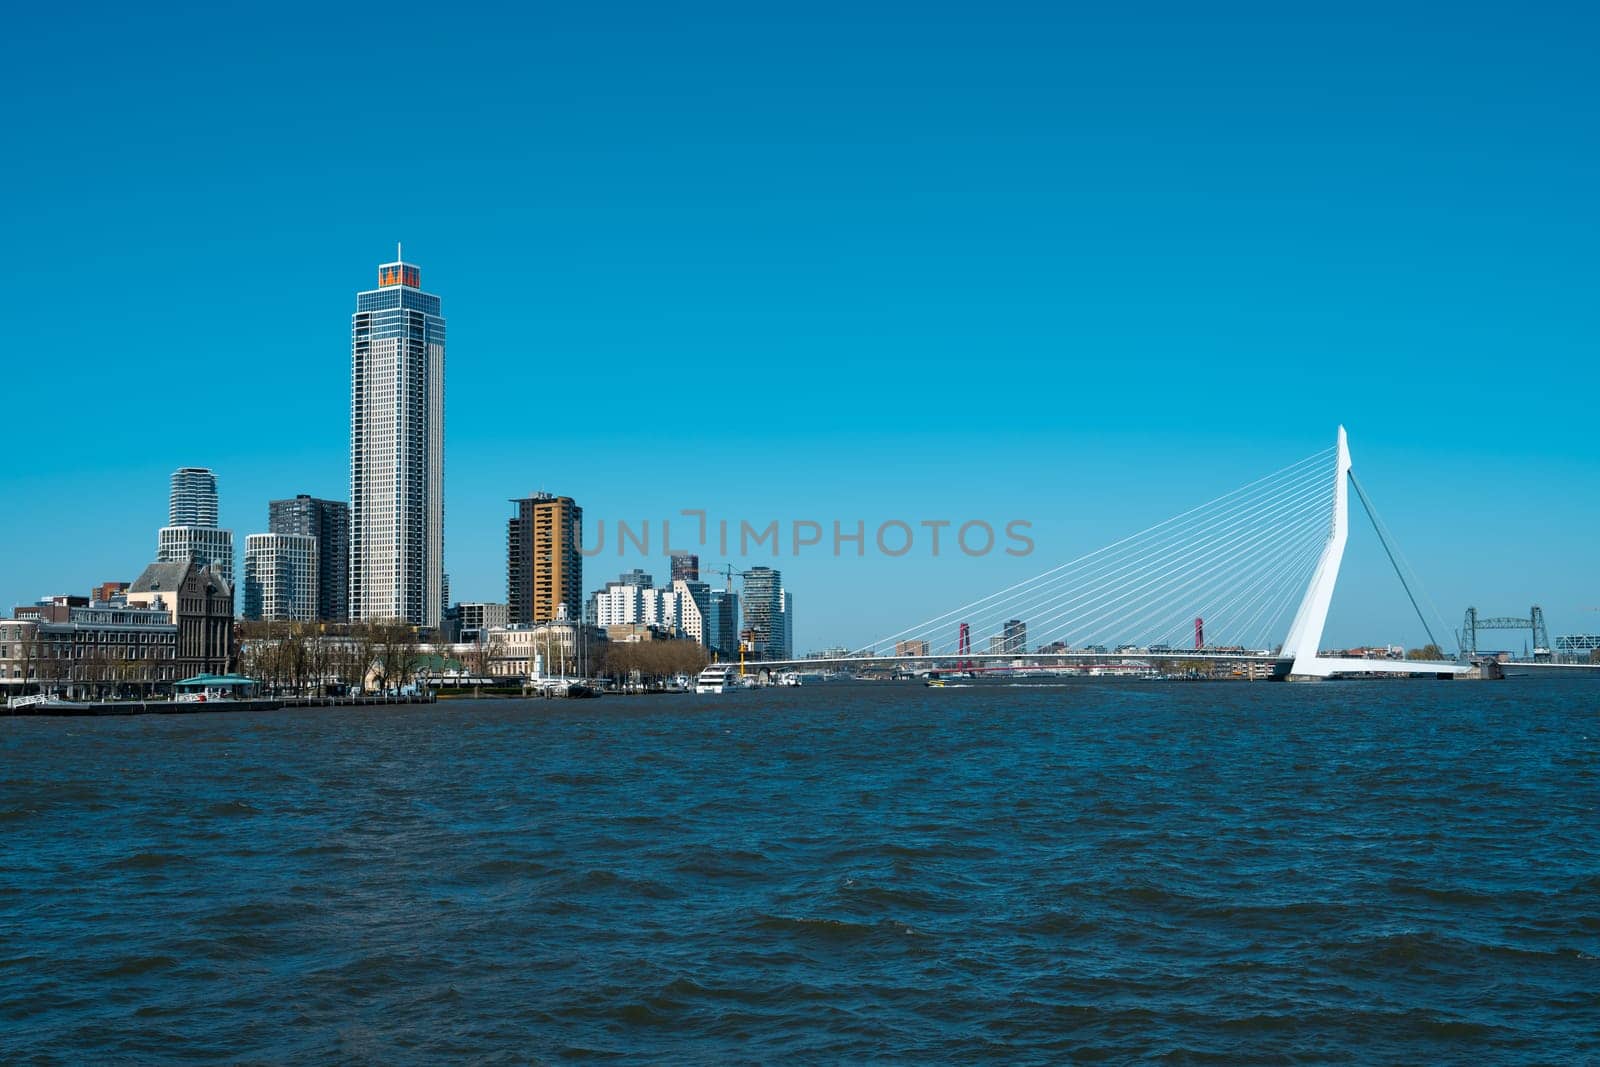 A breathtaking view of the iconic Erasmus Bridge and modern business center skyline in Rotterdam, captured from the water on a sunlit day, showcasing the architectural elegance of the city.